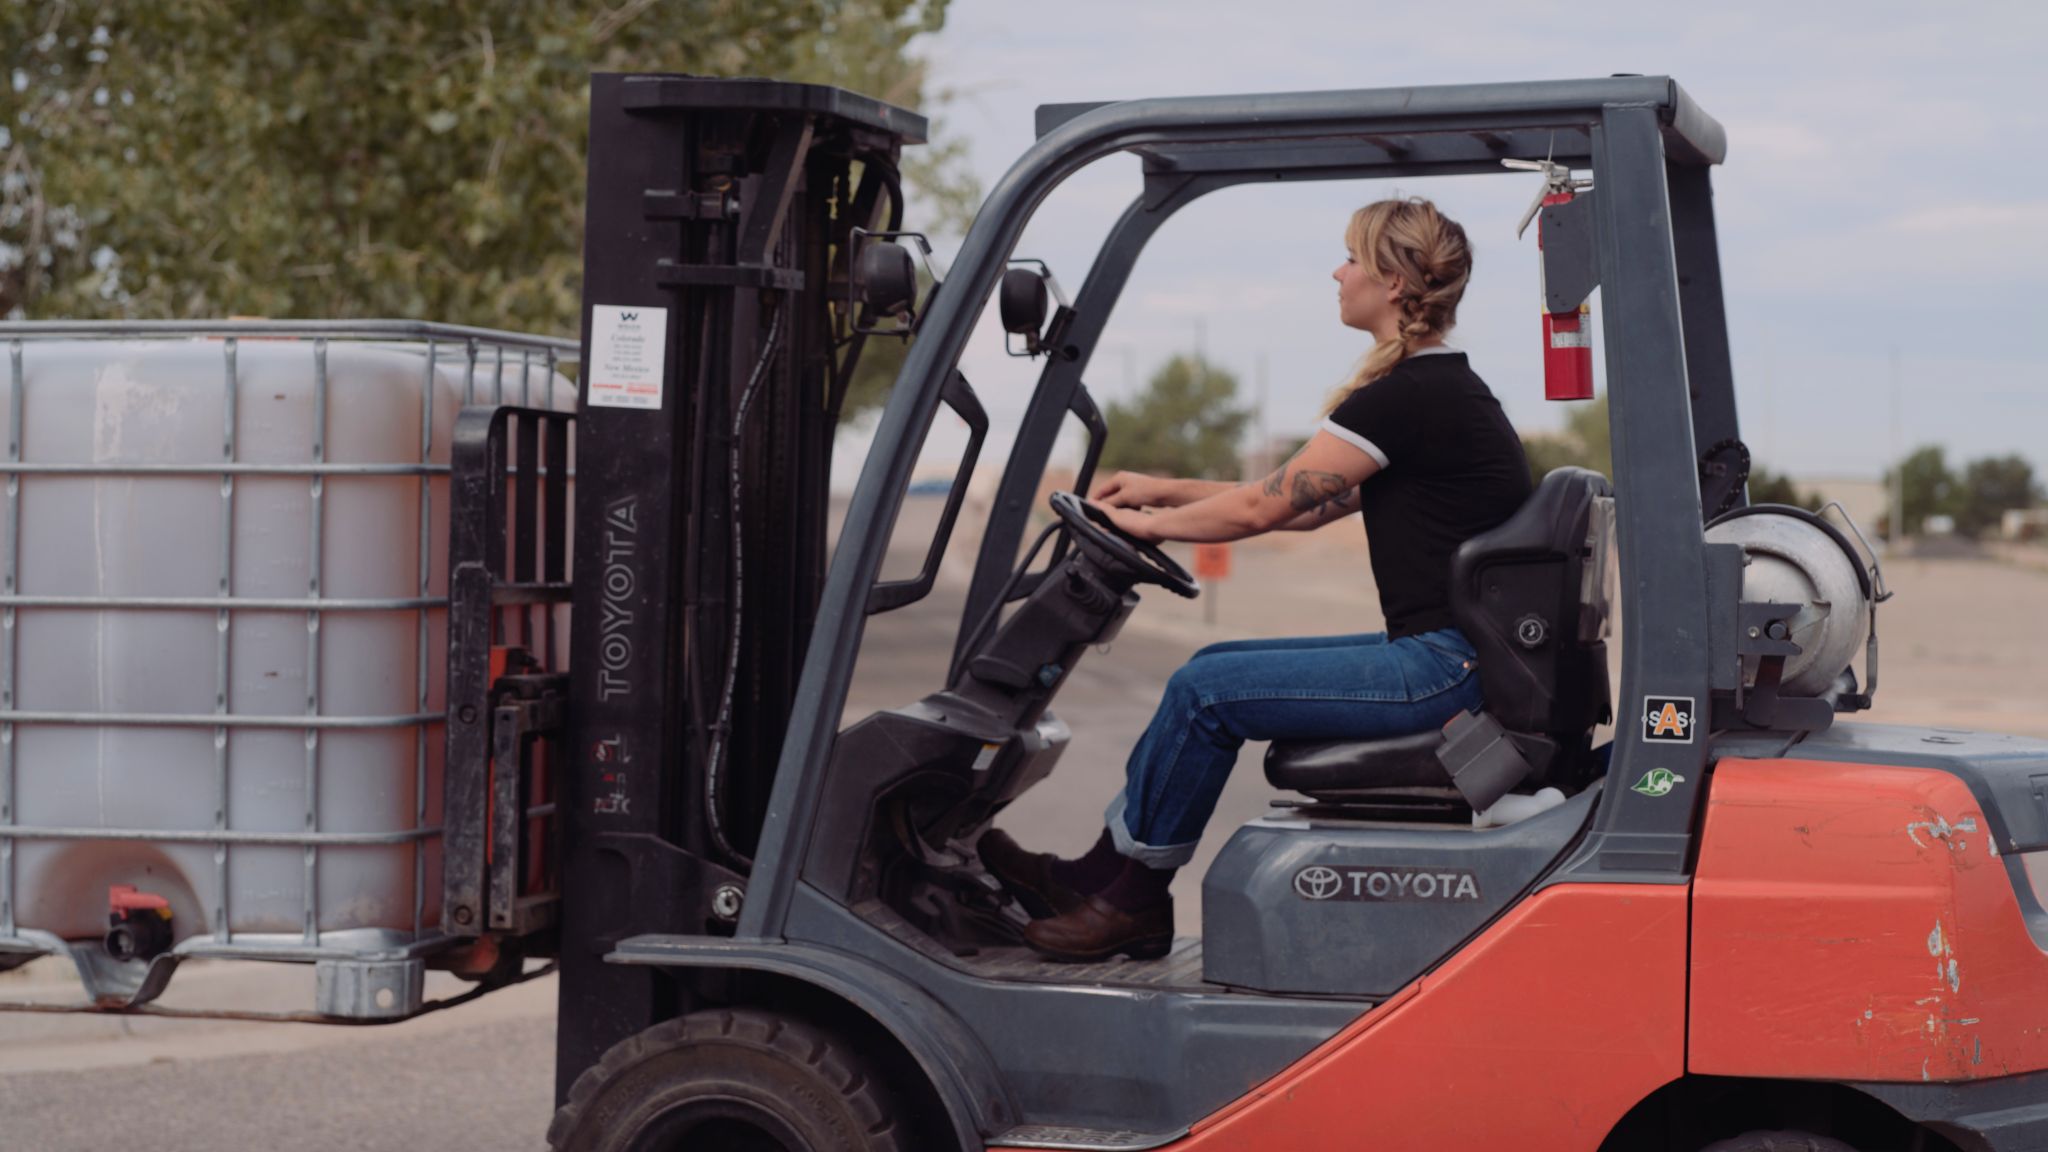 IU C&I Studios Portfolio Taylor Garrett Spirits Side profile of tattooed long blond haired woman wearing jeans and black and gray t shirt using a forklift